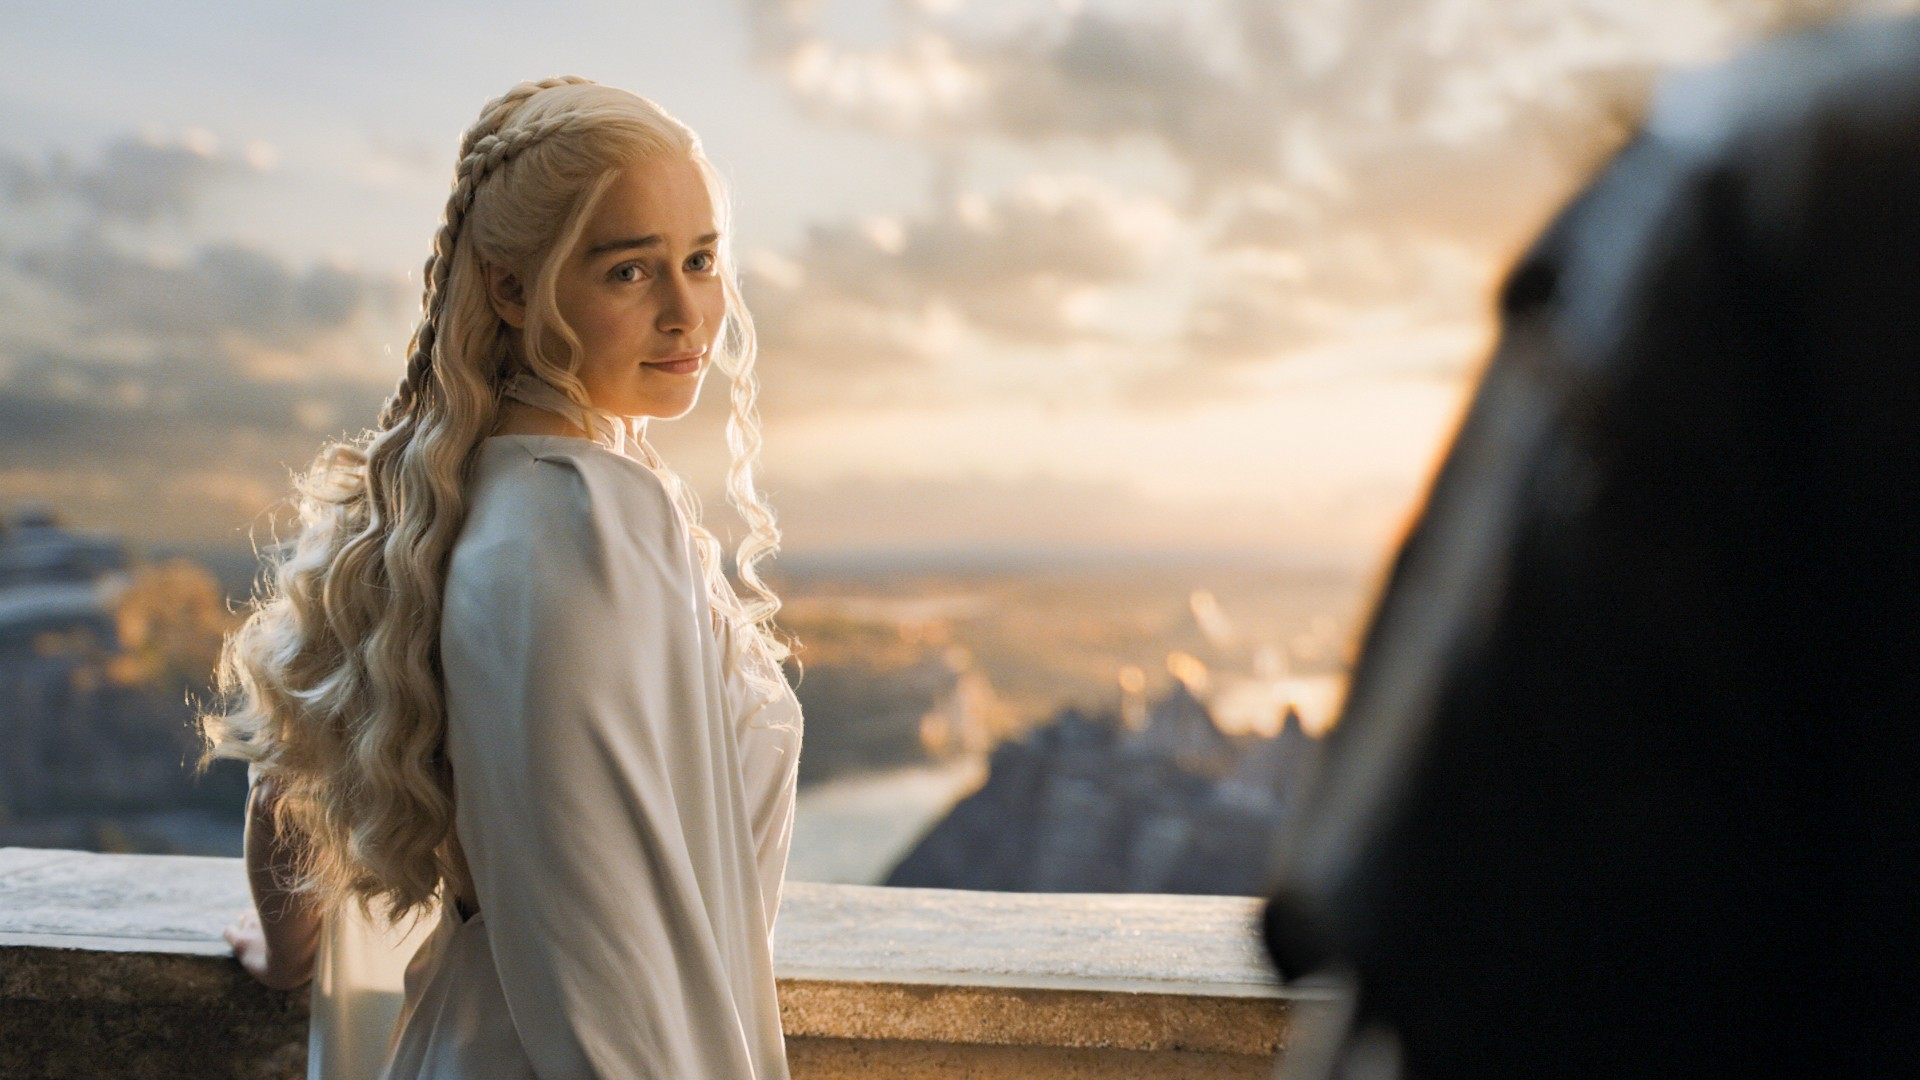 Game Of Thrones was the biggest TV show of the decade